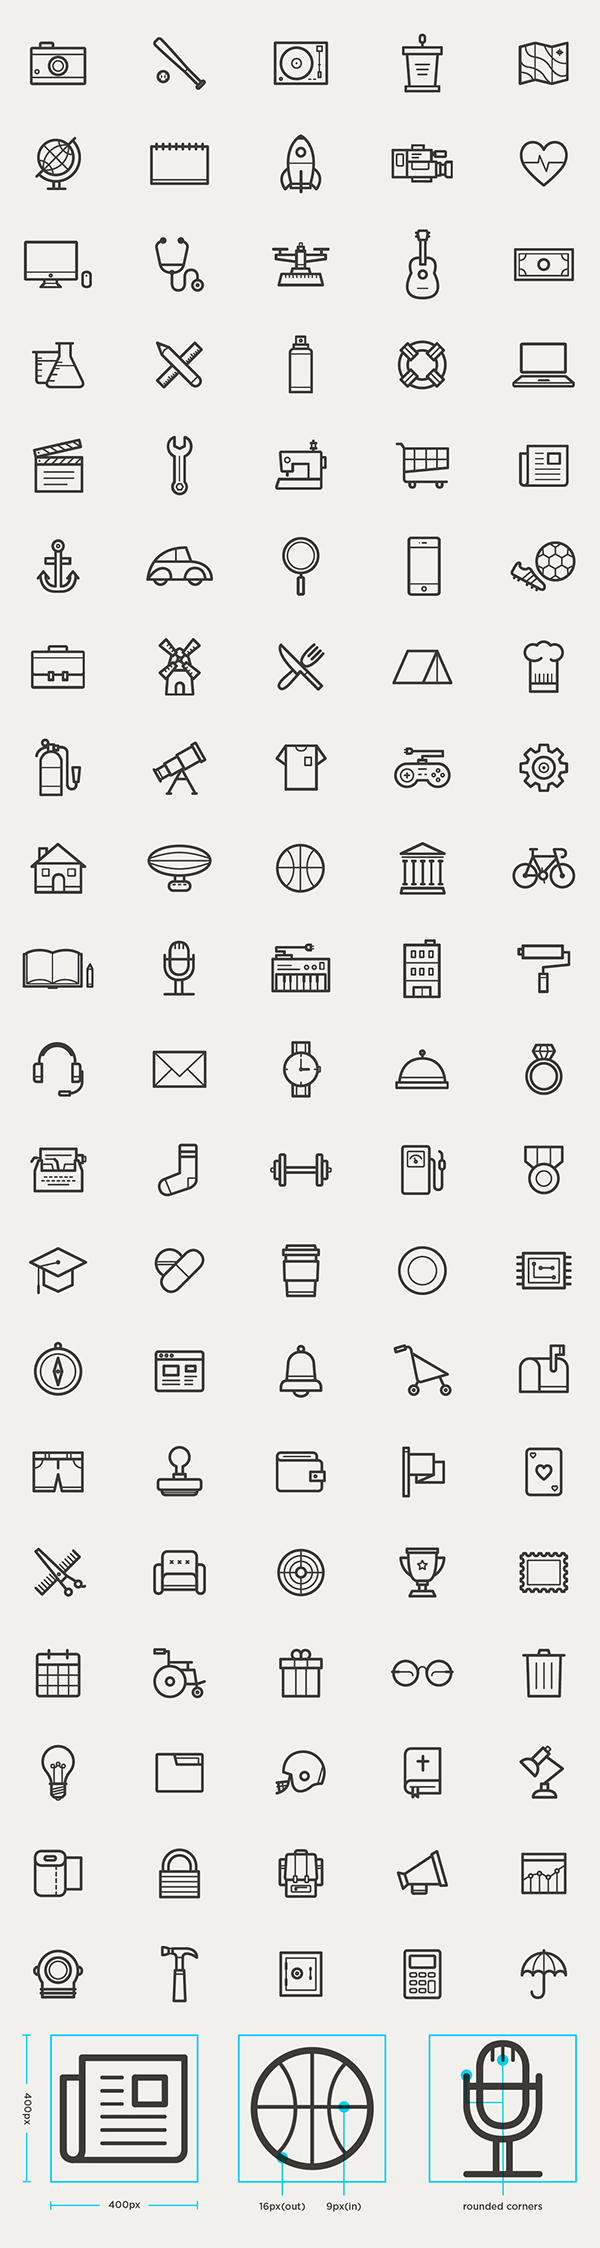 Free Outline Icons Set (95 Icons)